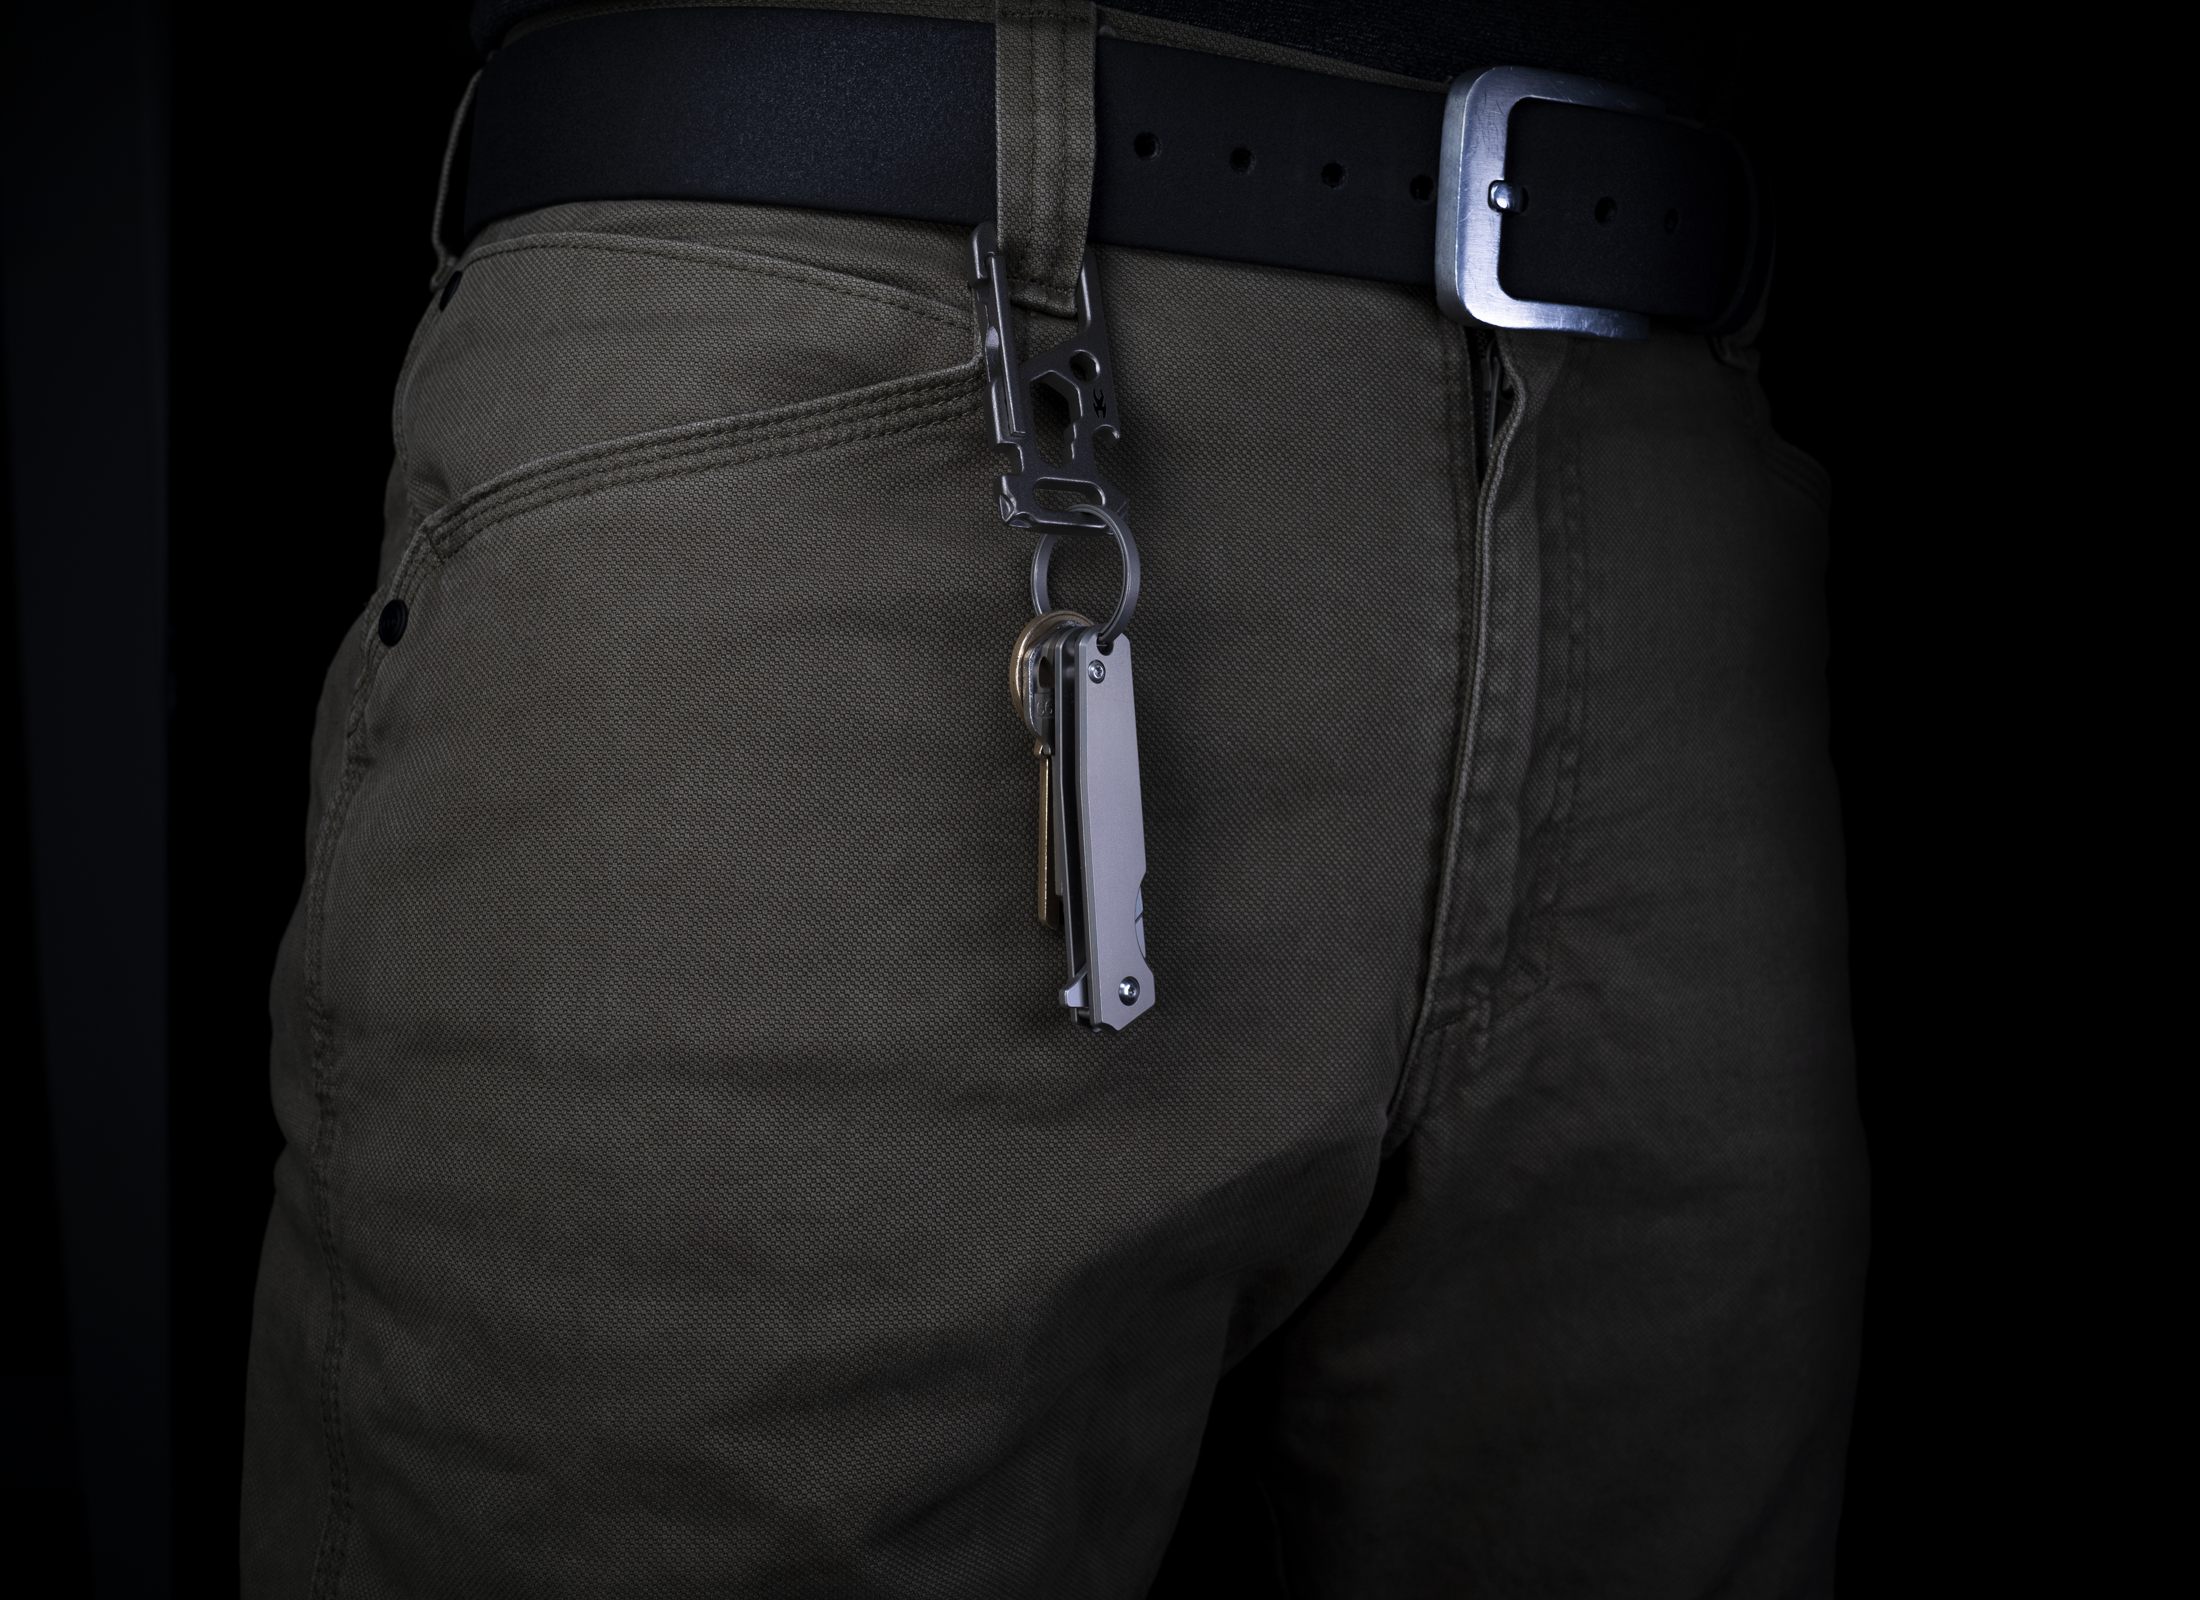 Korcraft TiBlade 01 Closed on keychain attached to jeans on Black Blackground